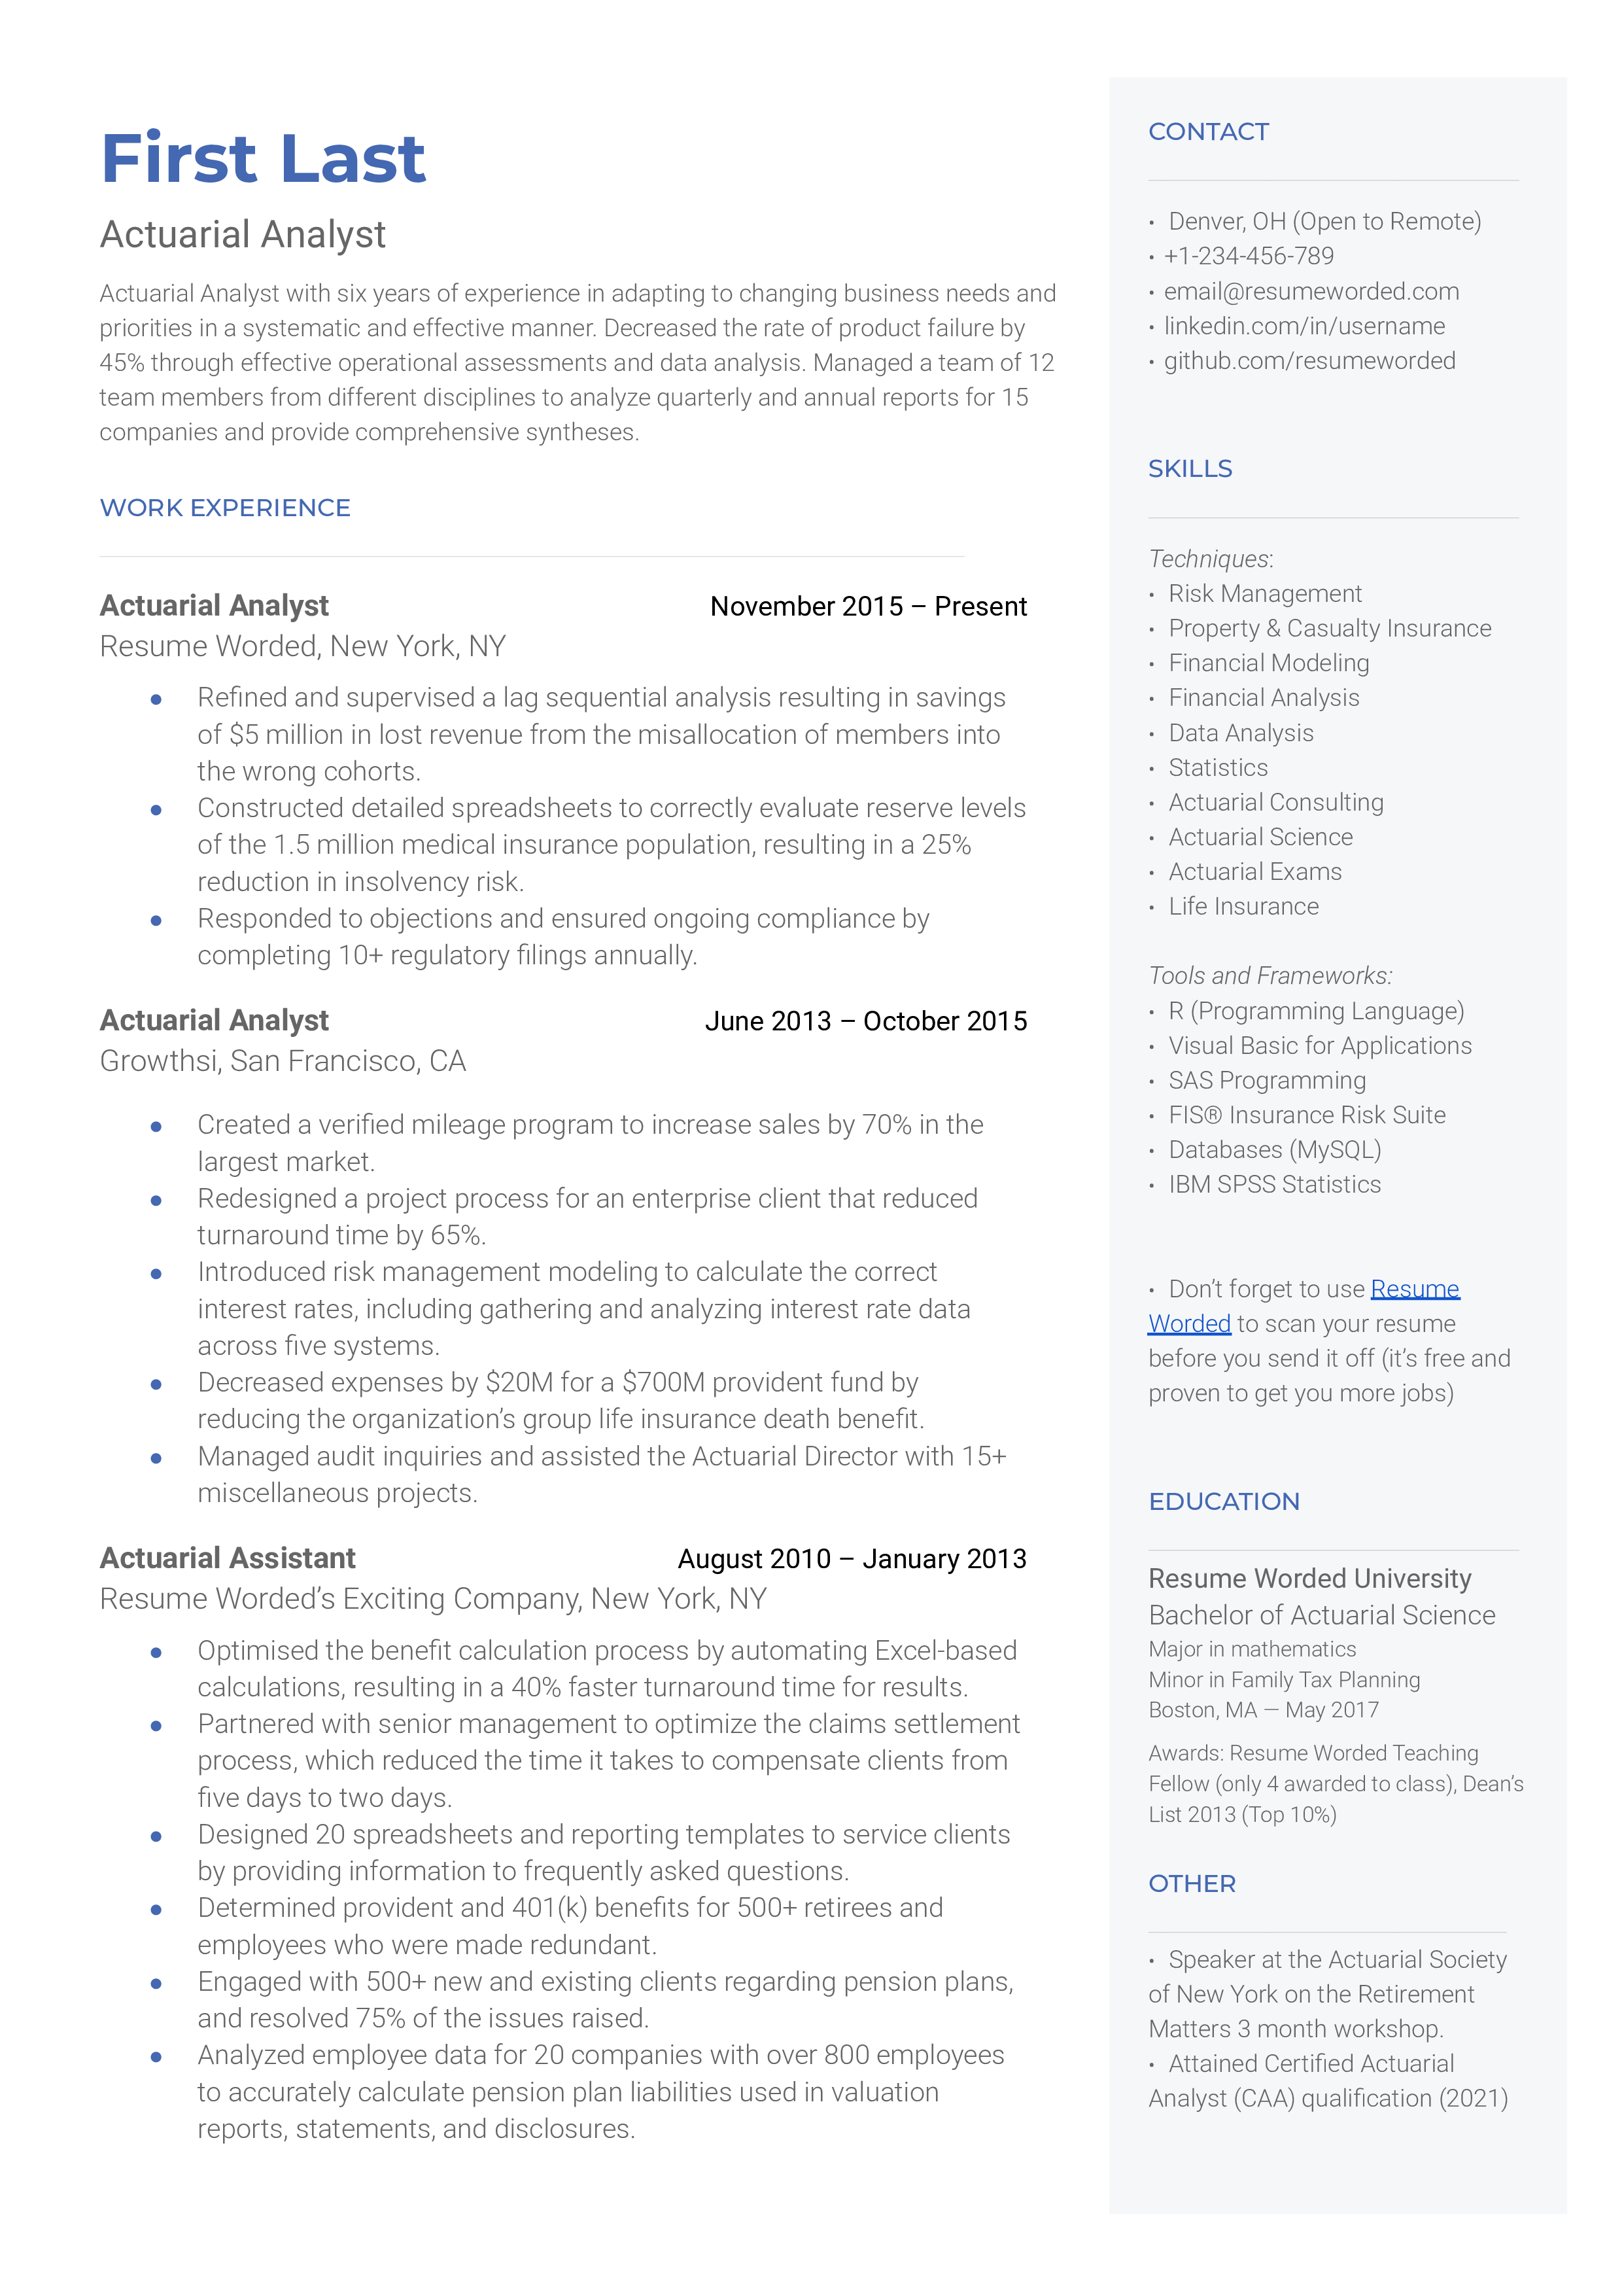 An Actuarial analyst resume sample that highlights the value addition of the applicants work and their certification credentials